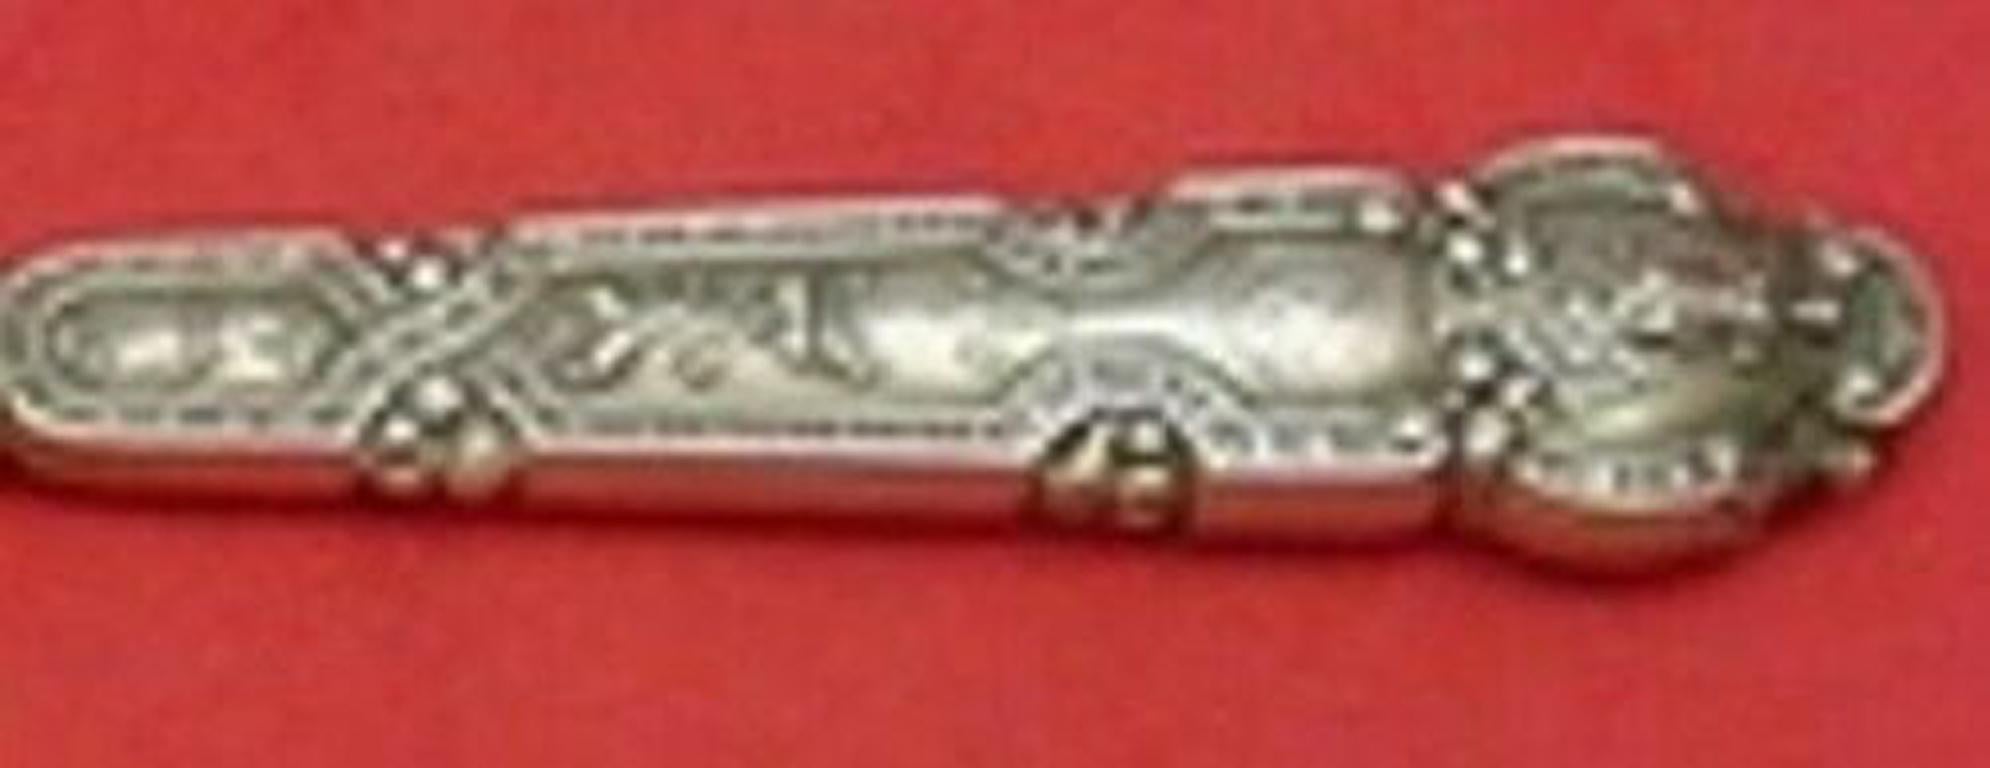 Sterling silver hollow handle with stainless blunt blade dinner knife 9 3/4